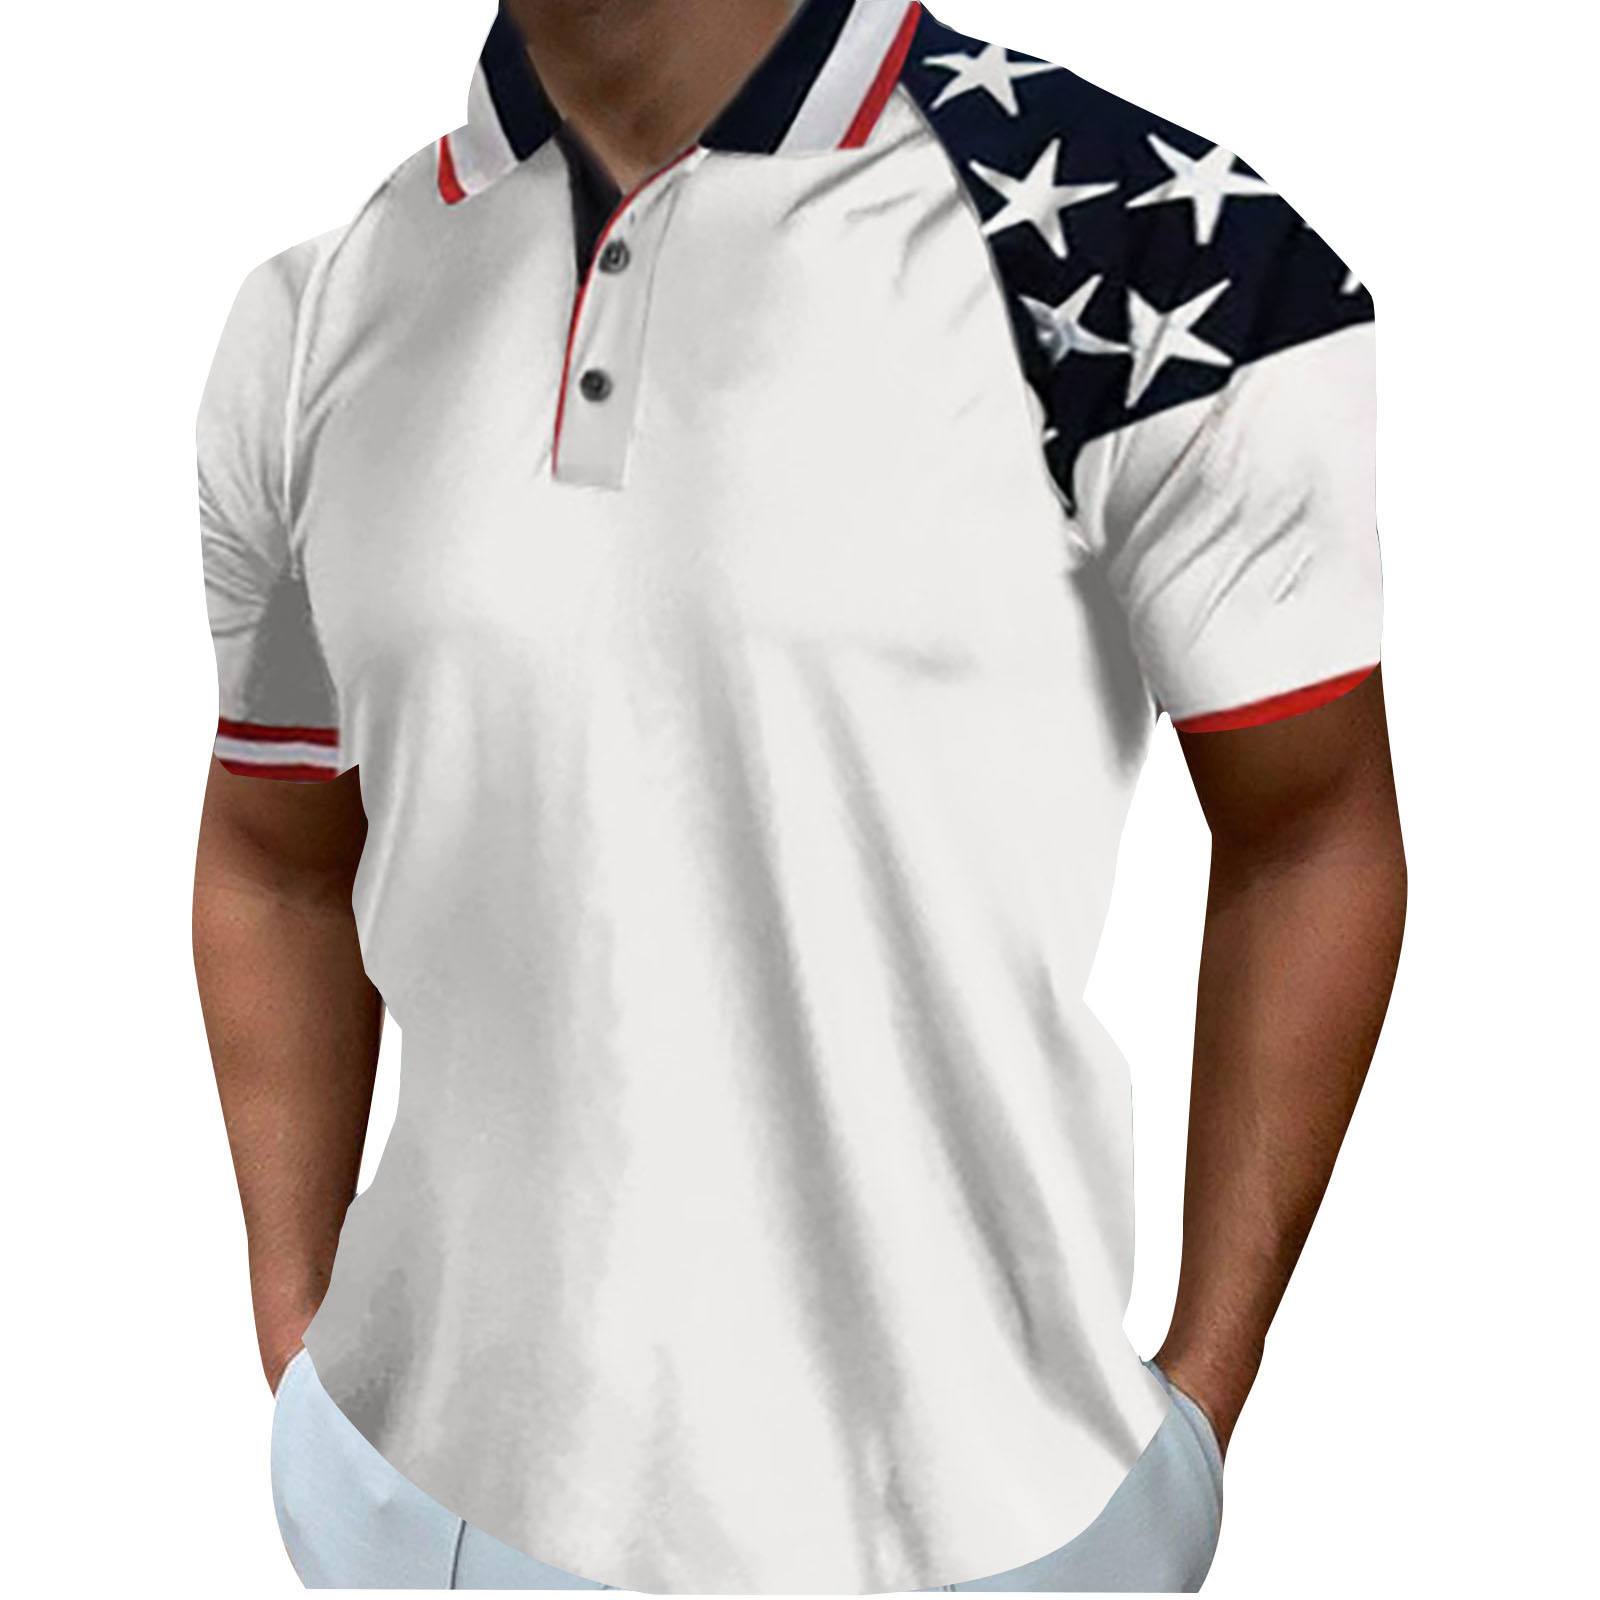 4th of July Shirts for Men Plus Size Summer Short Sleeve Lapel Polo ...